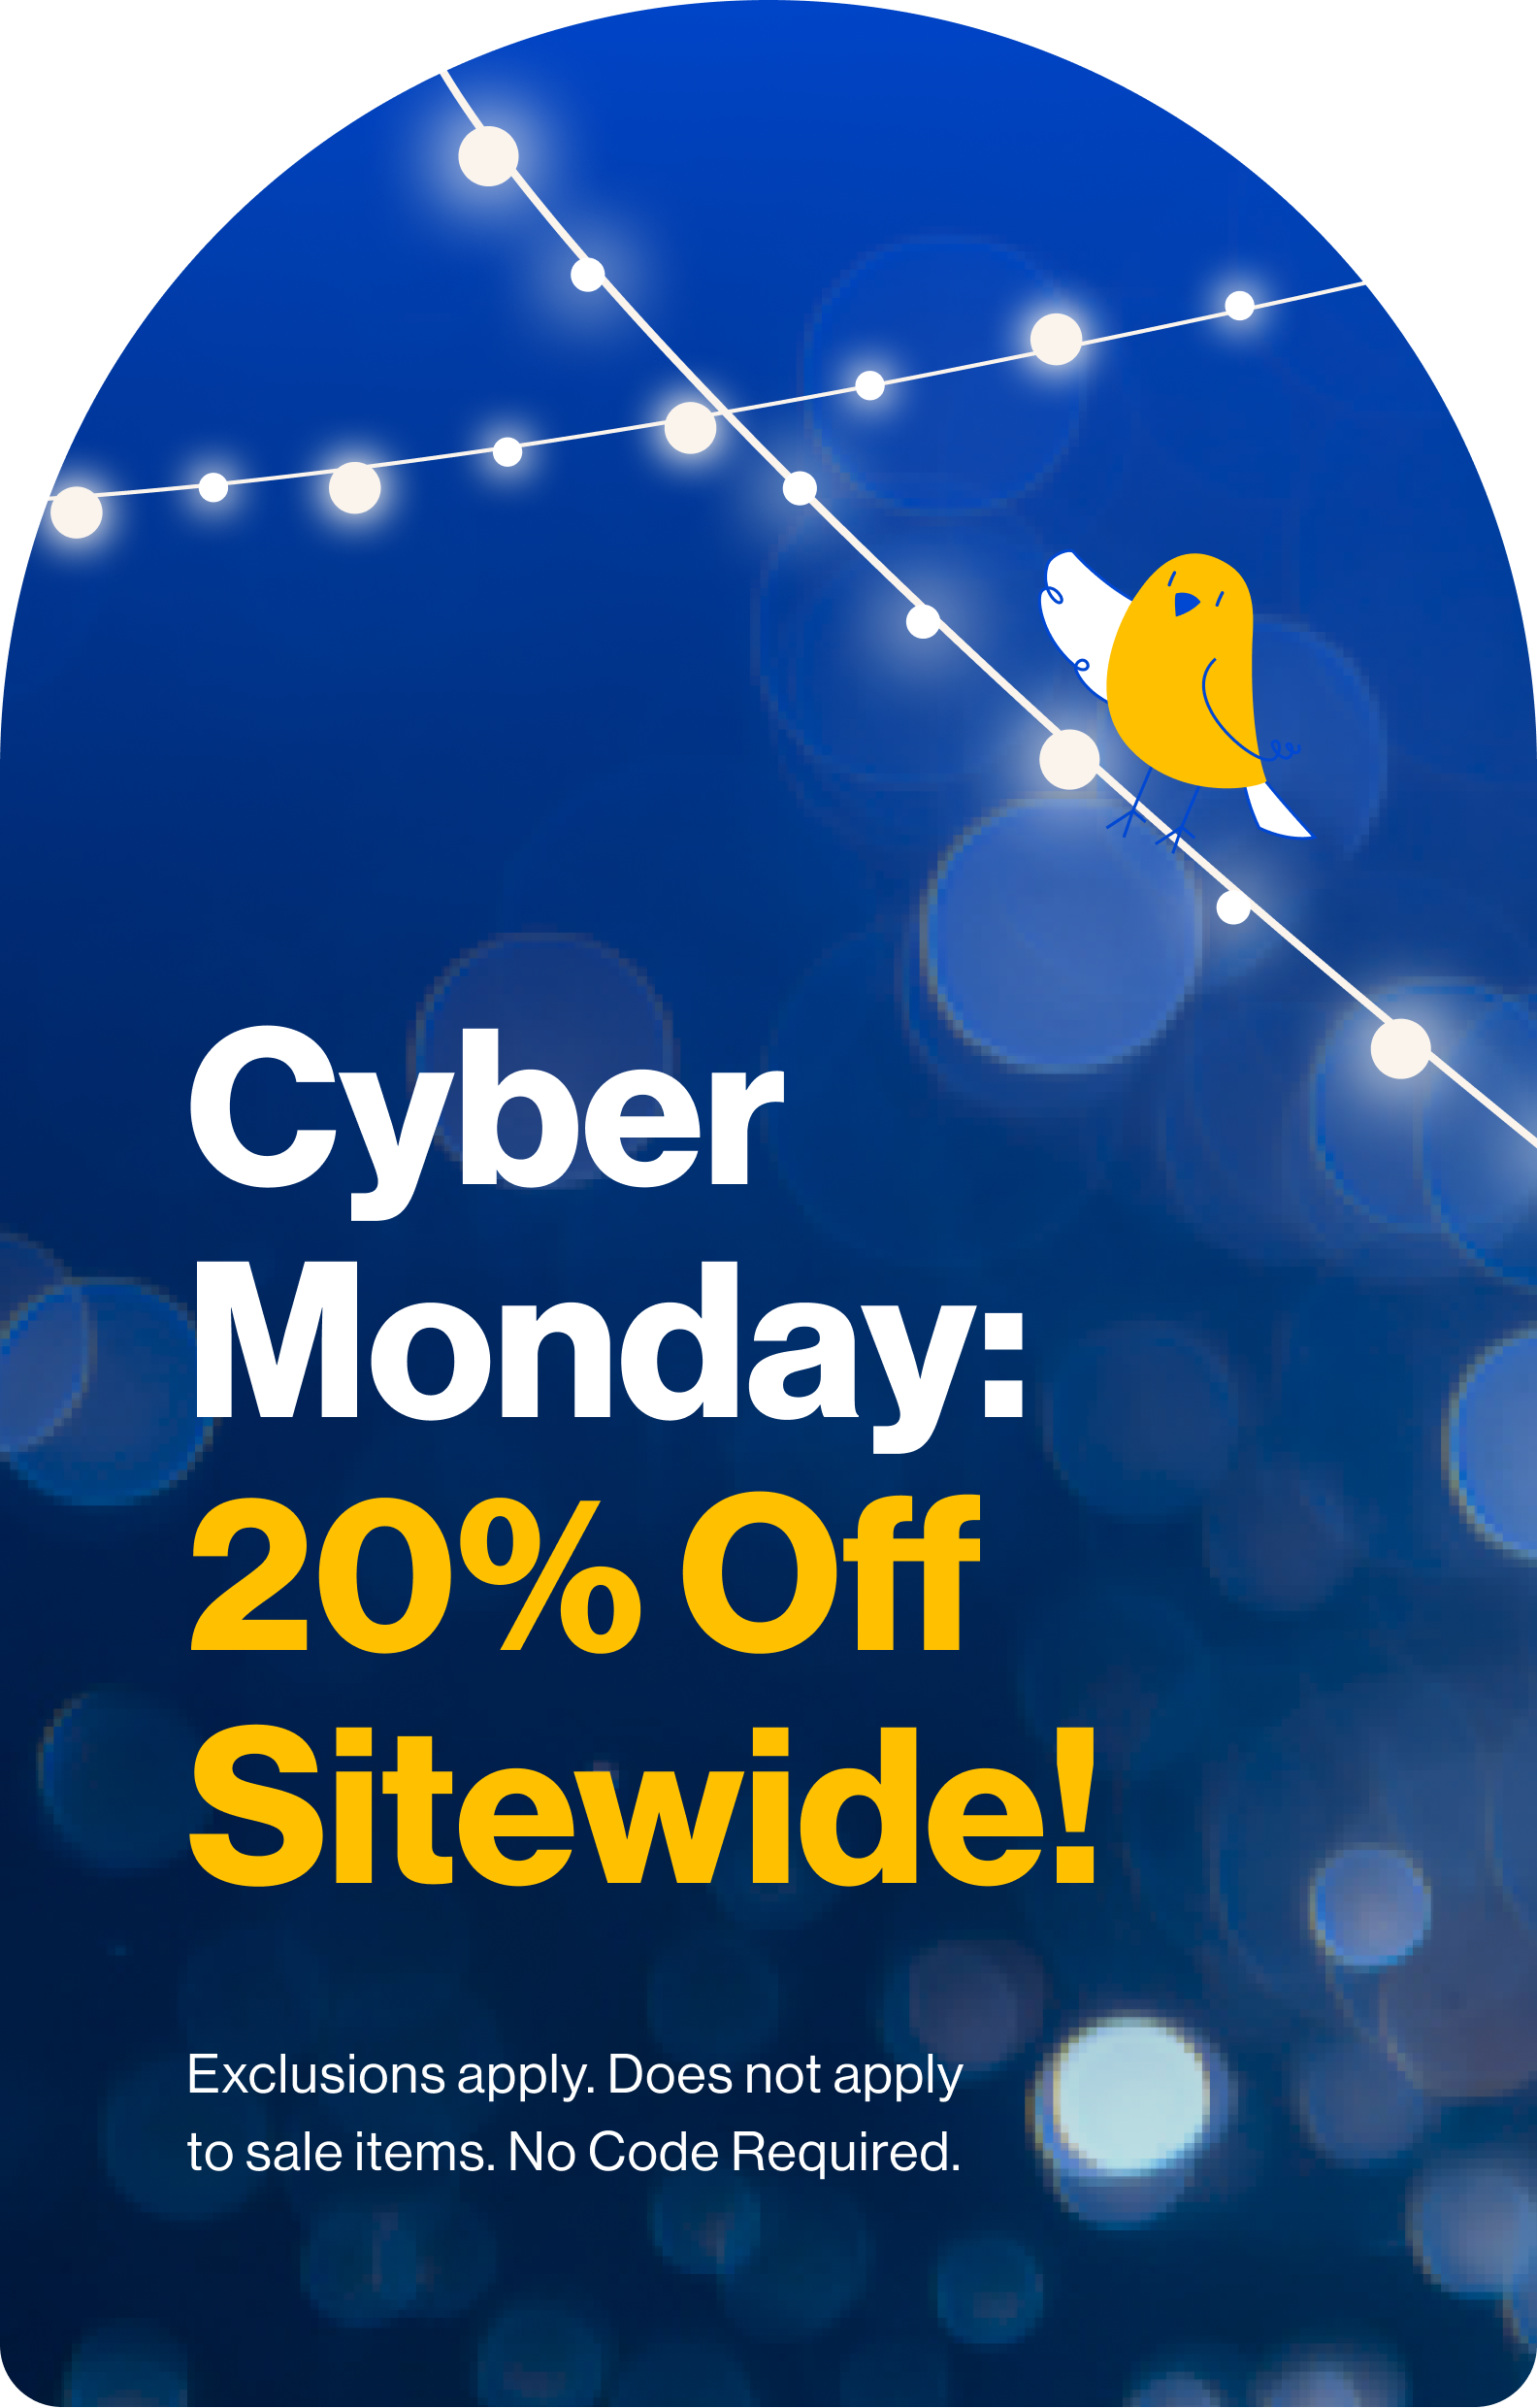 Cyber Monday: 20% Off Sitewide! Exclusions apply. Does not apply to sale items. No Code Required.